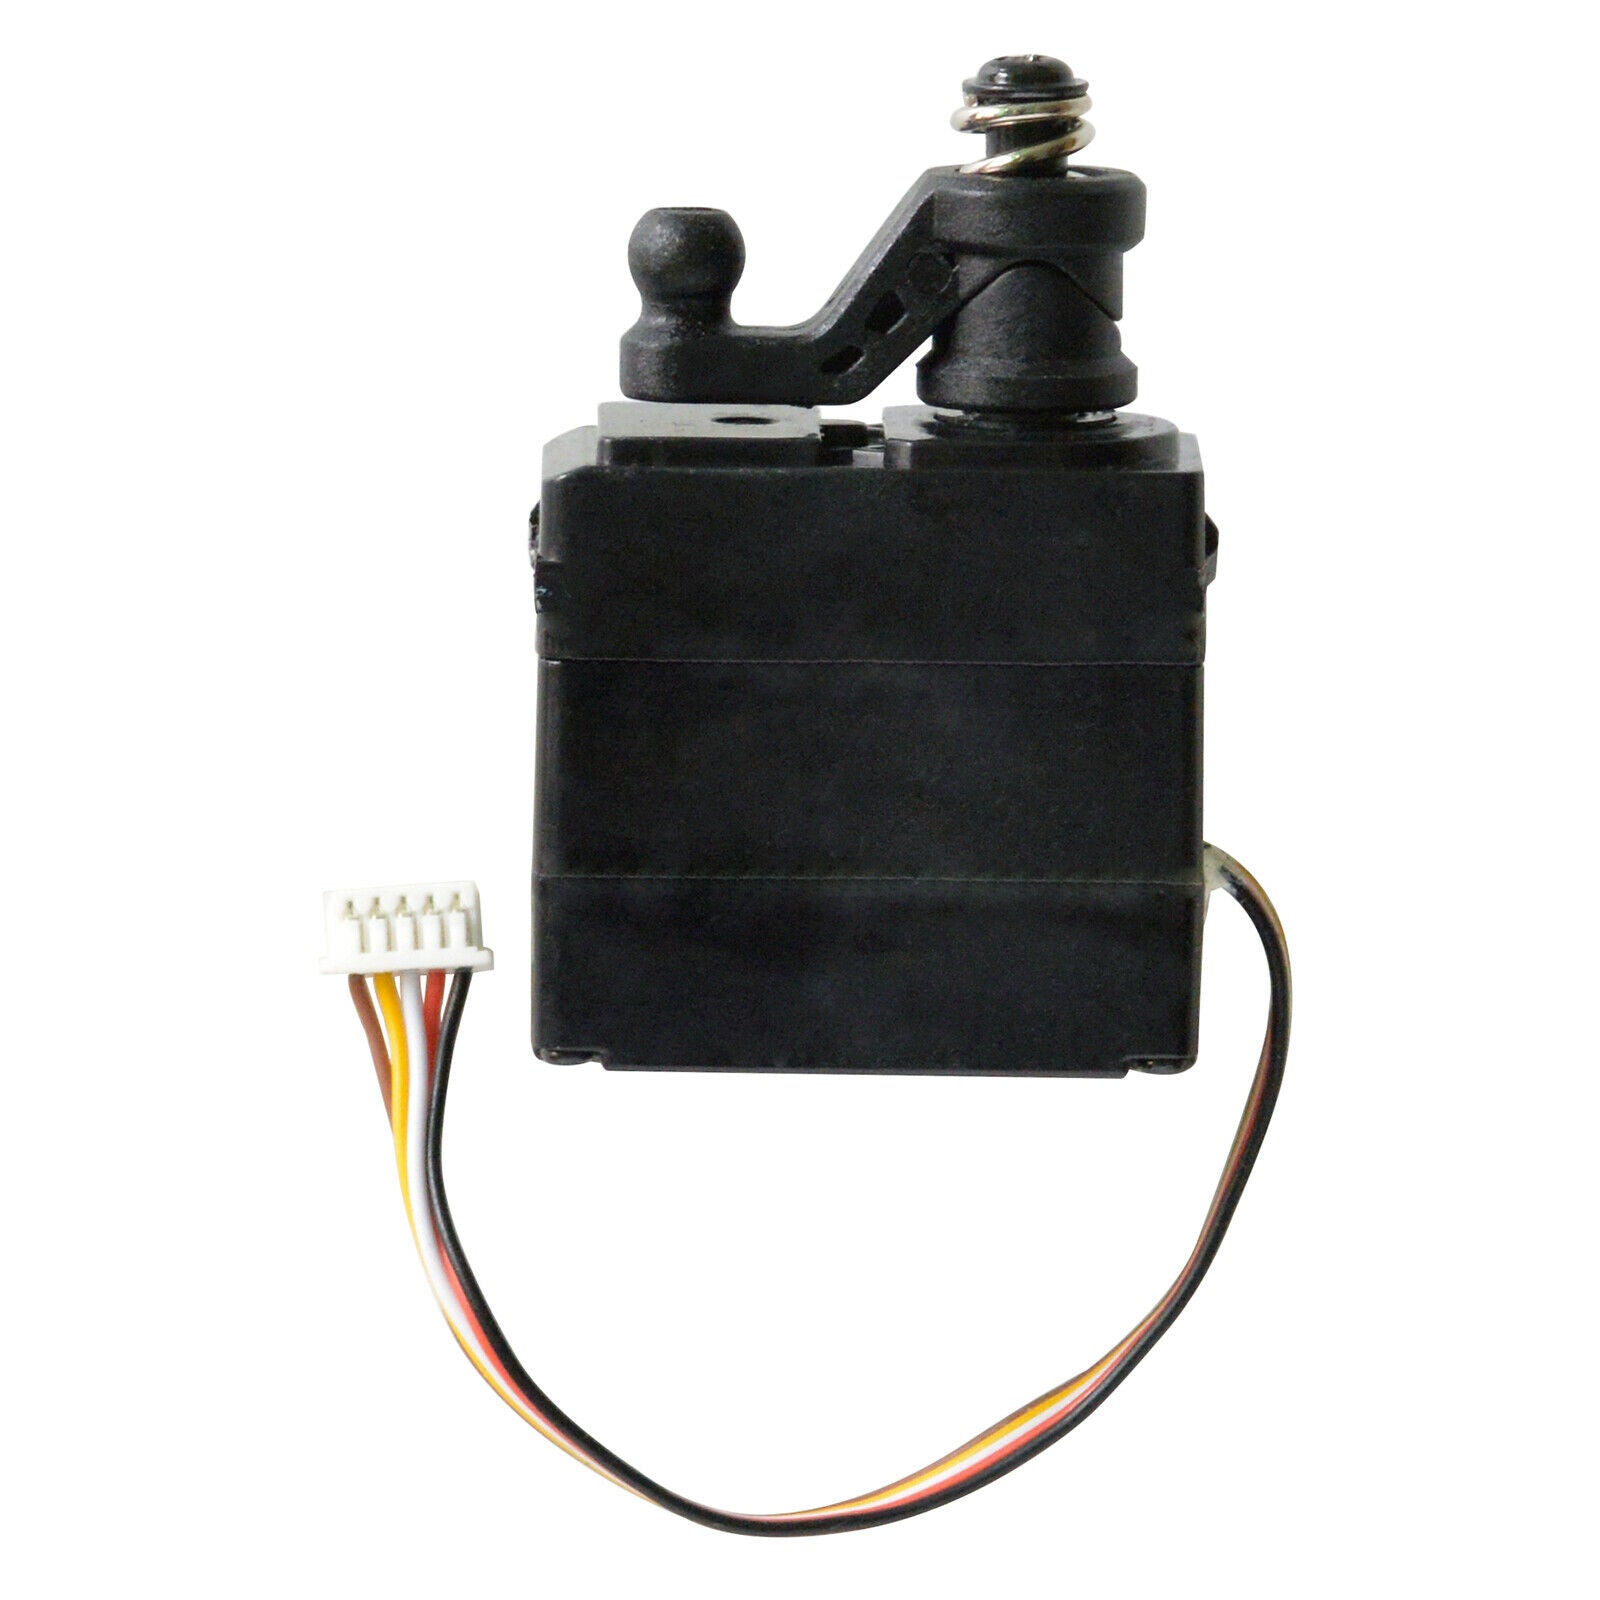 RC 5 Wire Servo Replacements for Xinlehong 9155 9156 Crawler Trucks DIY Accs